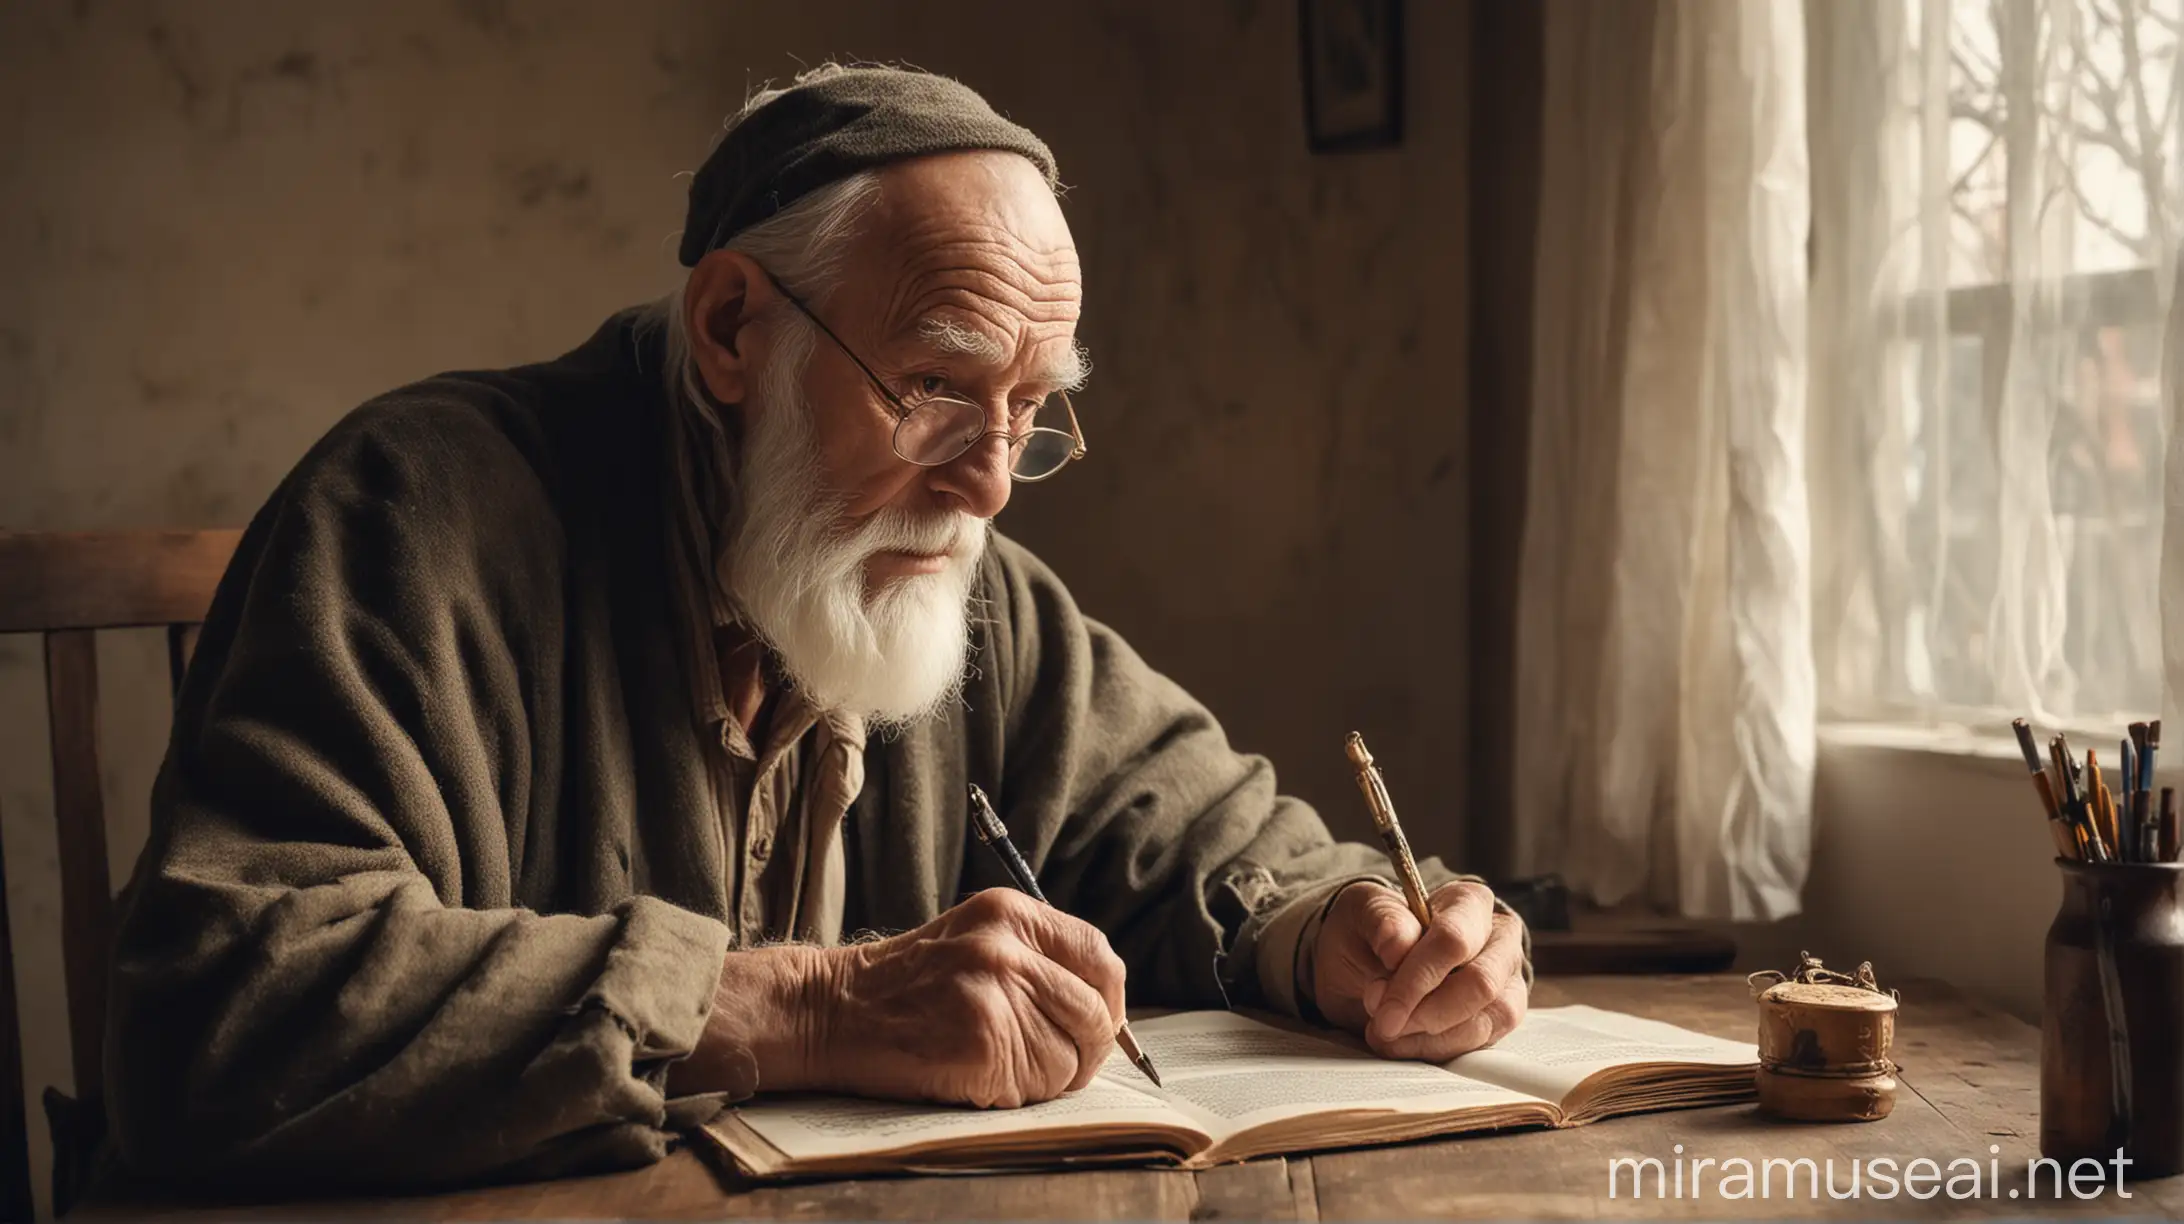 Wise Old Man Writing Wise Parables